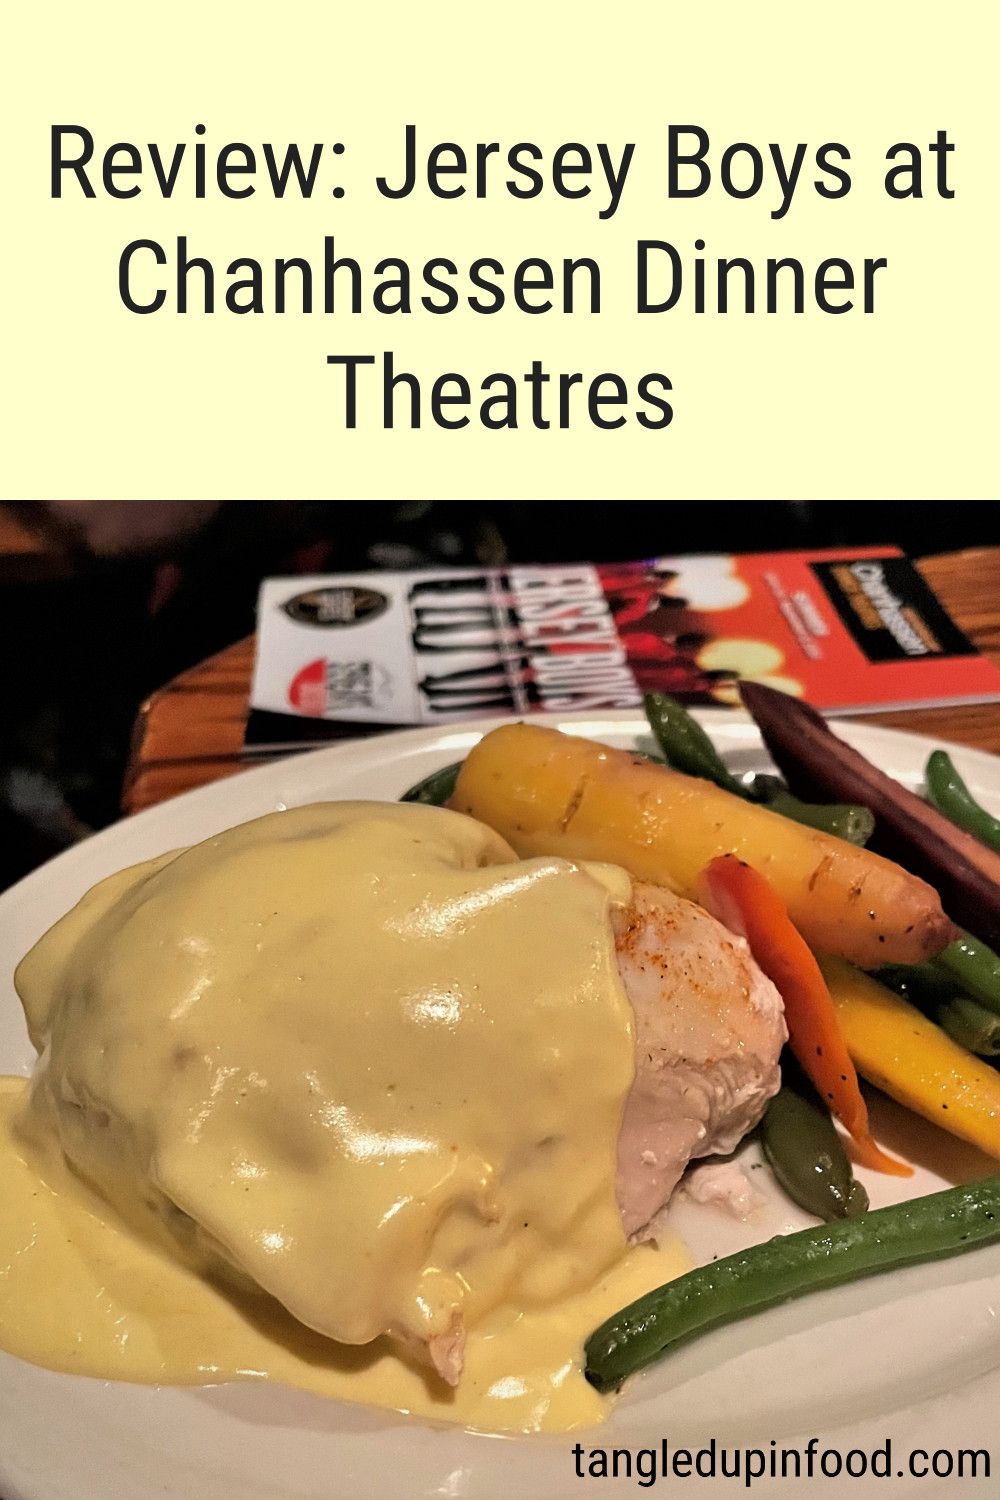 Photo of chicken breast covered with hollandaise sauce with text reading "Review: Jersey Boys at Chanhassen Dinner Theatres"